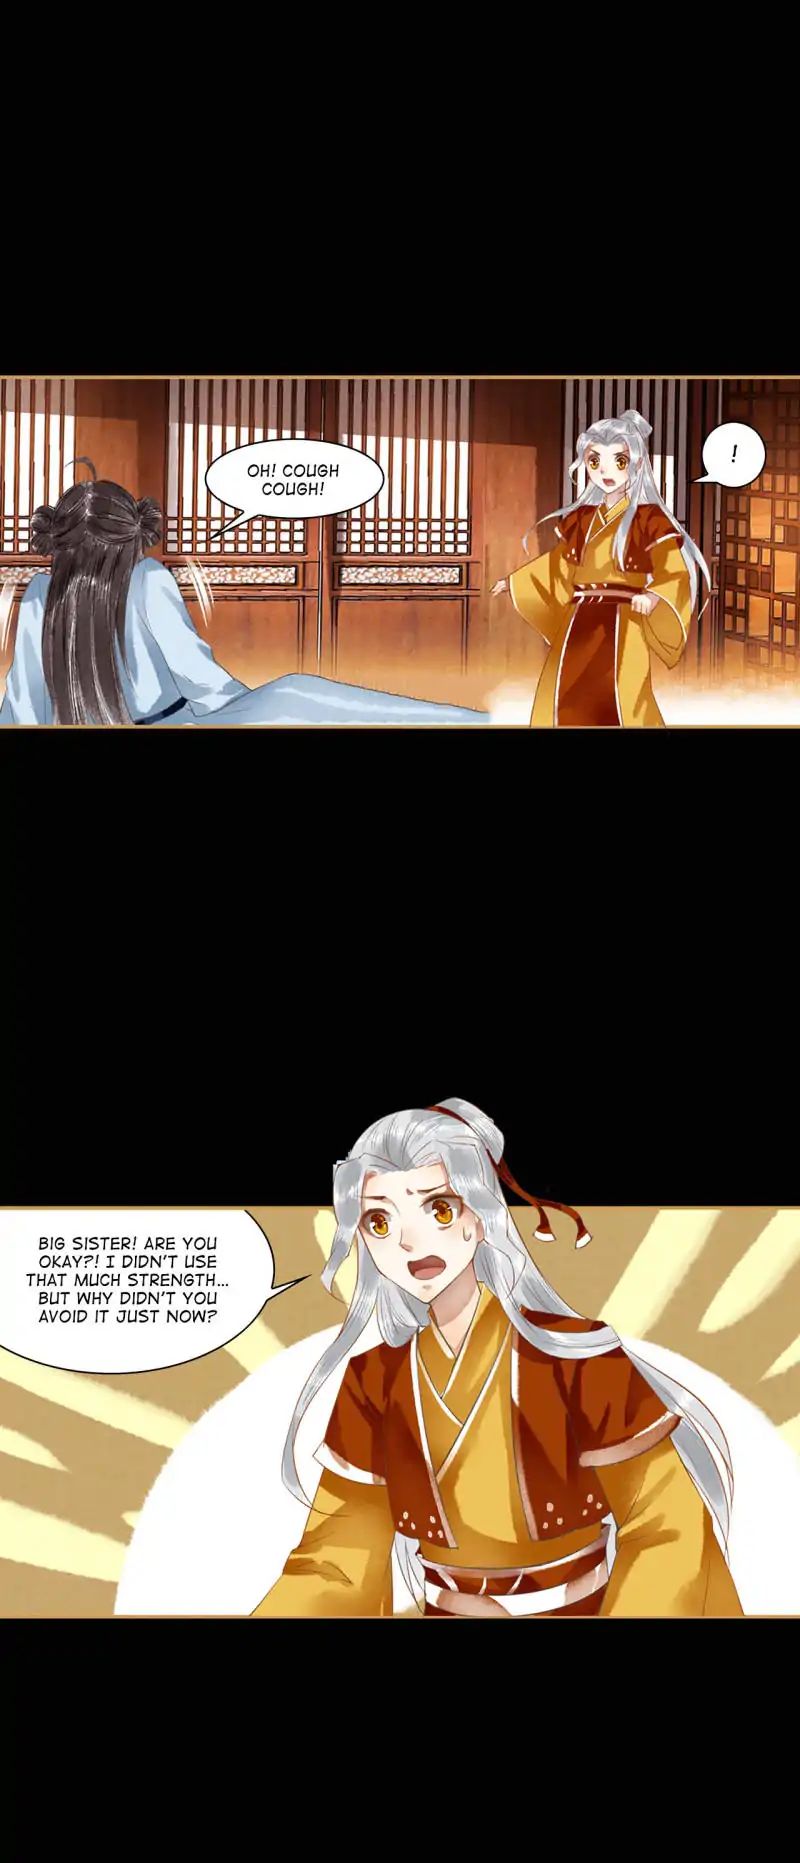 The Favored Concubine - Page 1